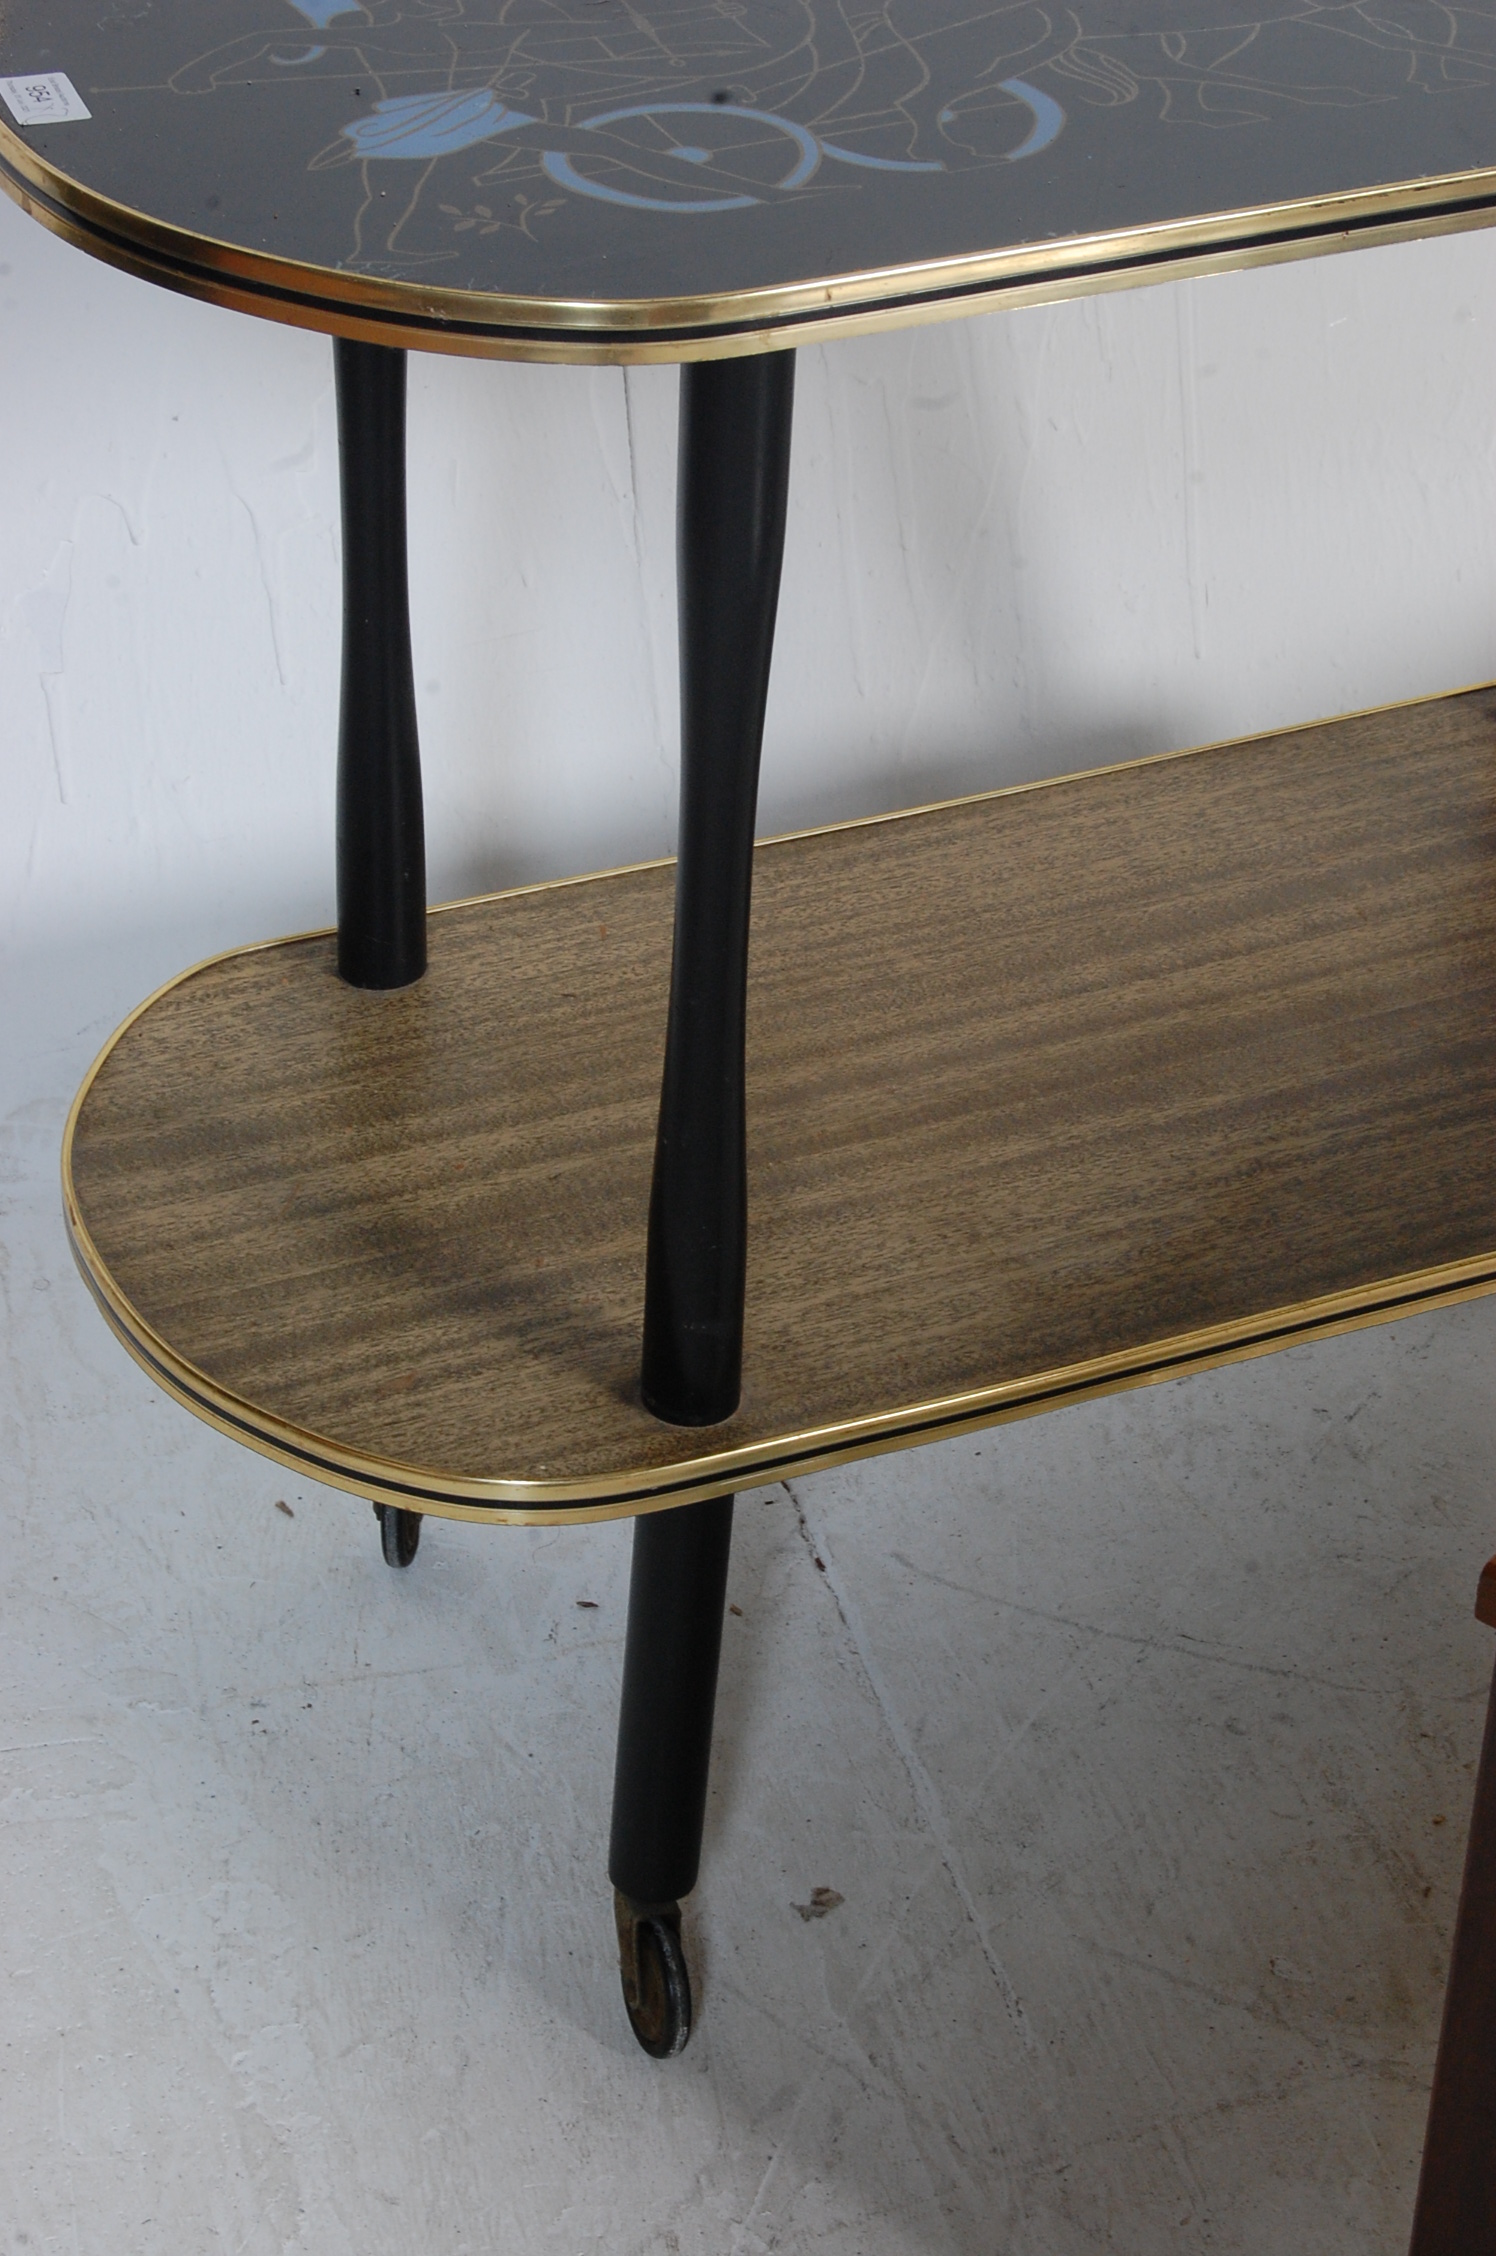 RETRO VINTAGE 20TH CENTURY LONG JOHN COFFEE TABLE TOGETHER WITH A TROLLEY. - Image 4 of 5